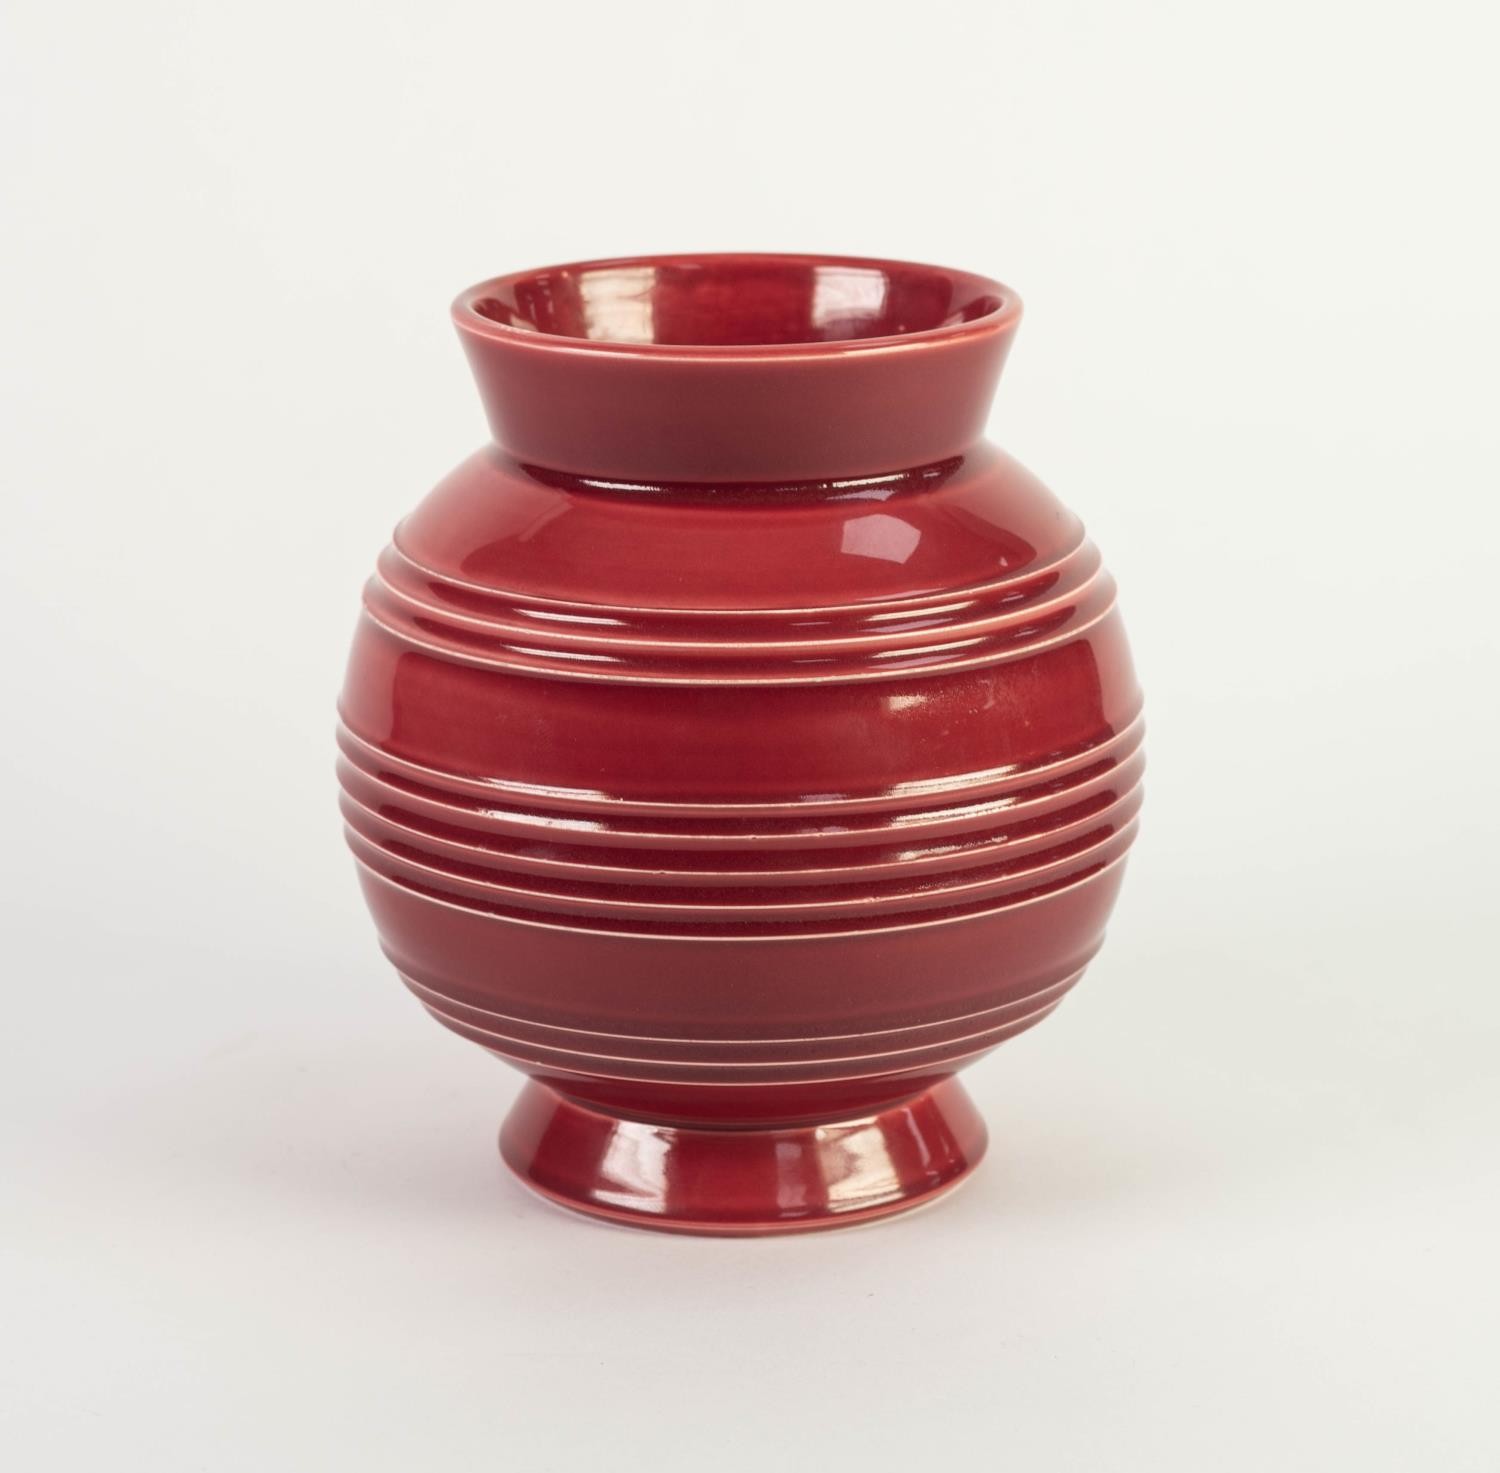 MINTON DARK PINK GLAZED STUDIO POTTERY ORBICULAR VASE with three bands of three, five and three - Image 2 of 3